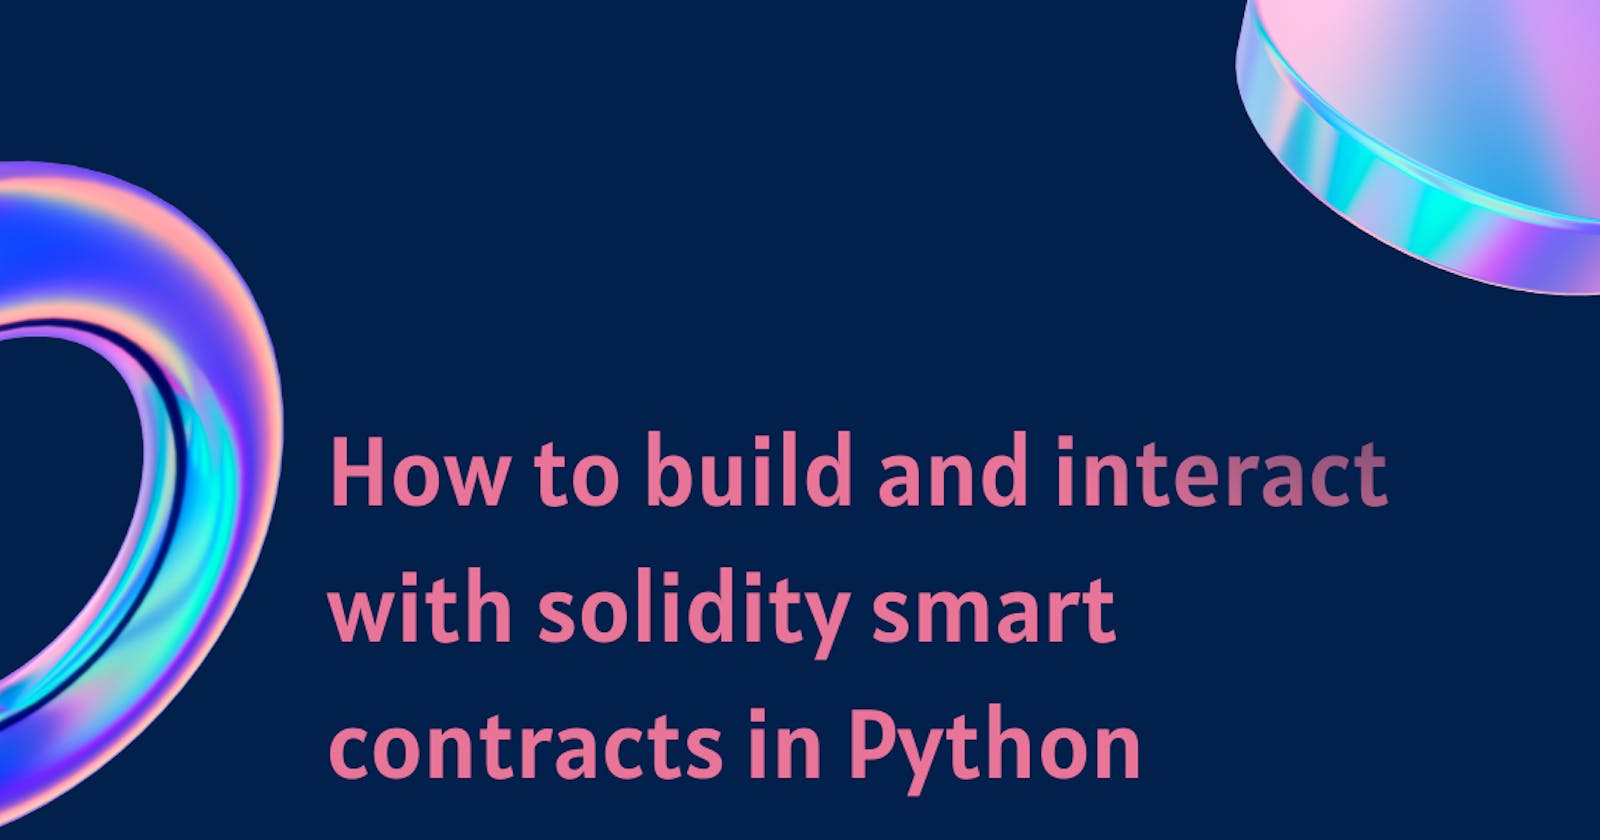 An Introduction To Web3.py: How to build and interact with solidity smart contracts in Python